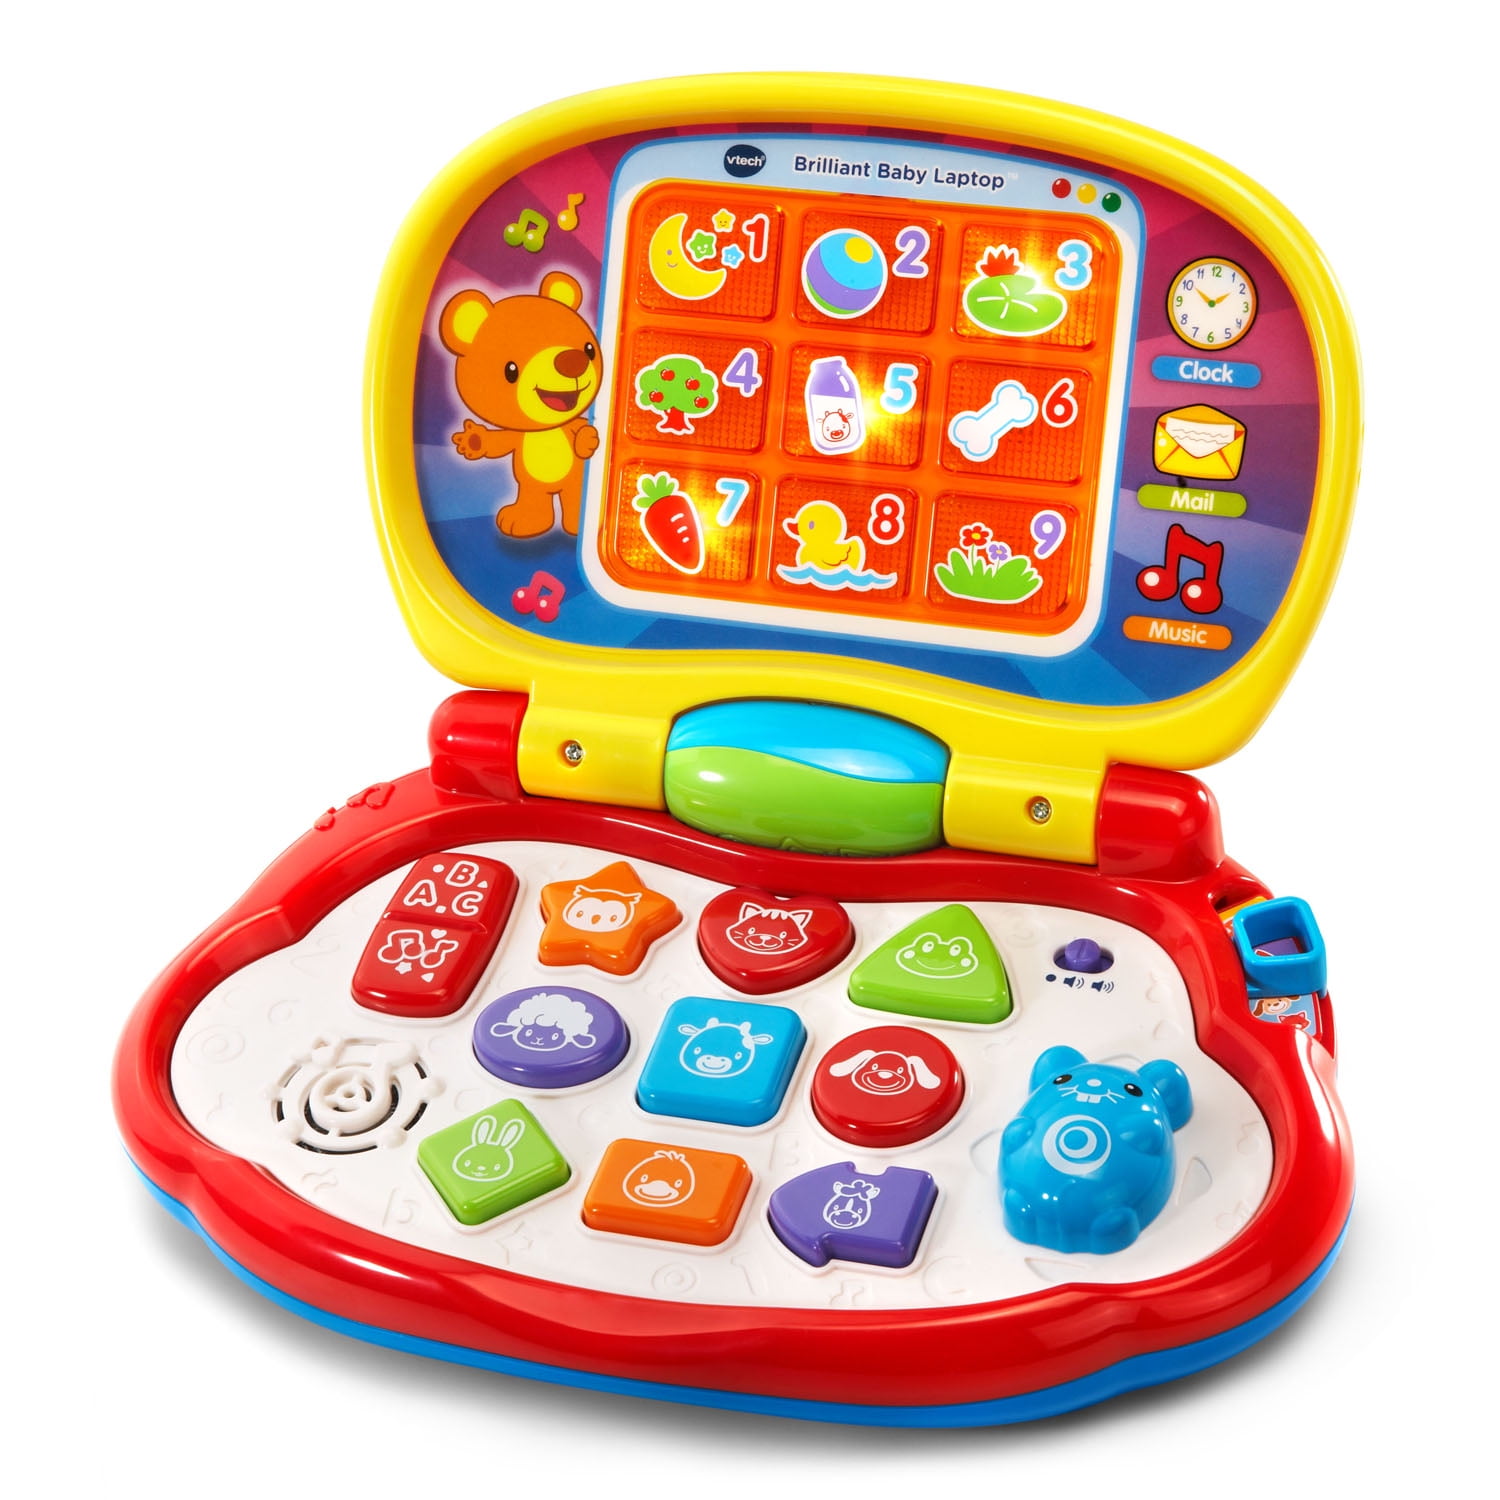 Vtec Baby's Educational Laptop Get your little one their own very first laptop 